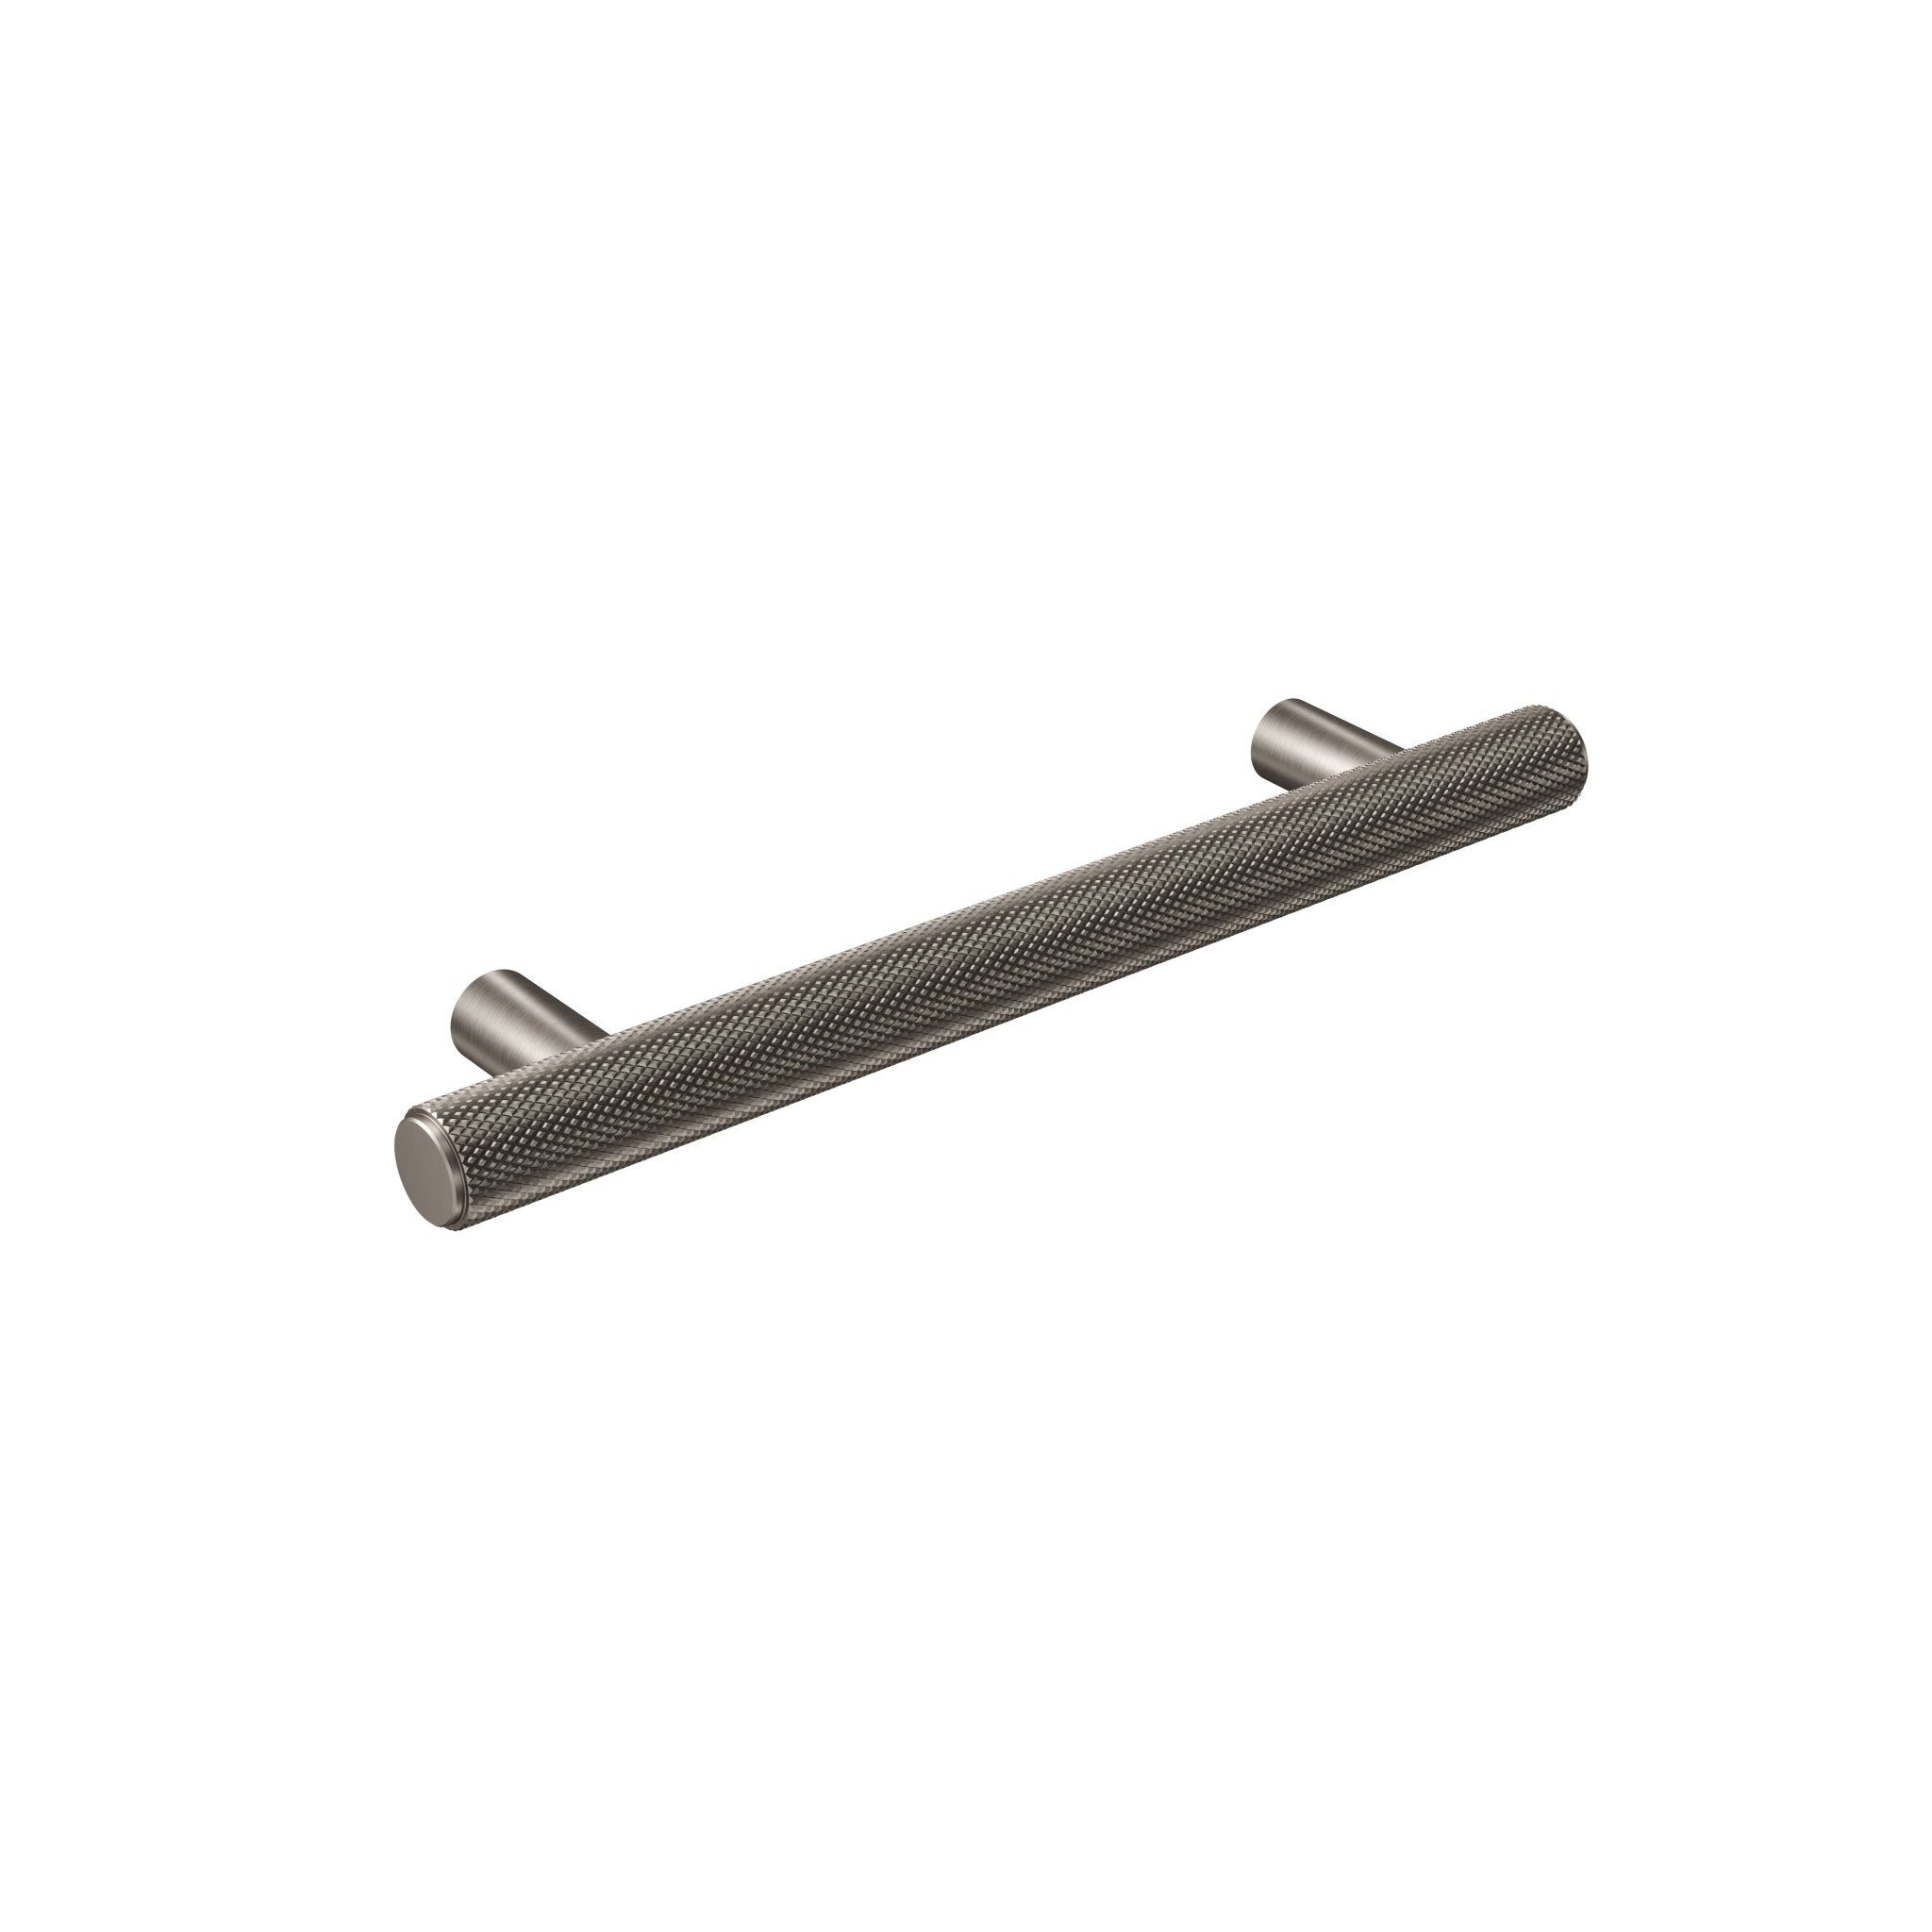 Knurl 15mm Pull Handle-Industrial Nickel-180mm-The Hairpin Leg Co.